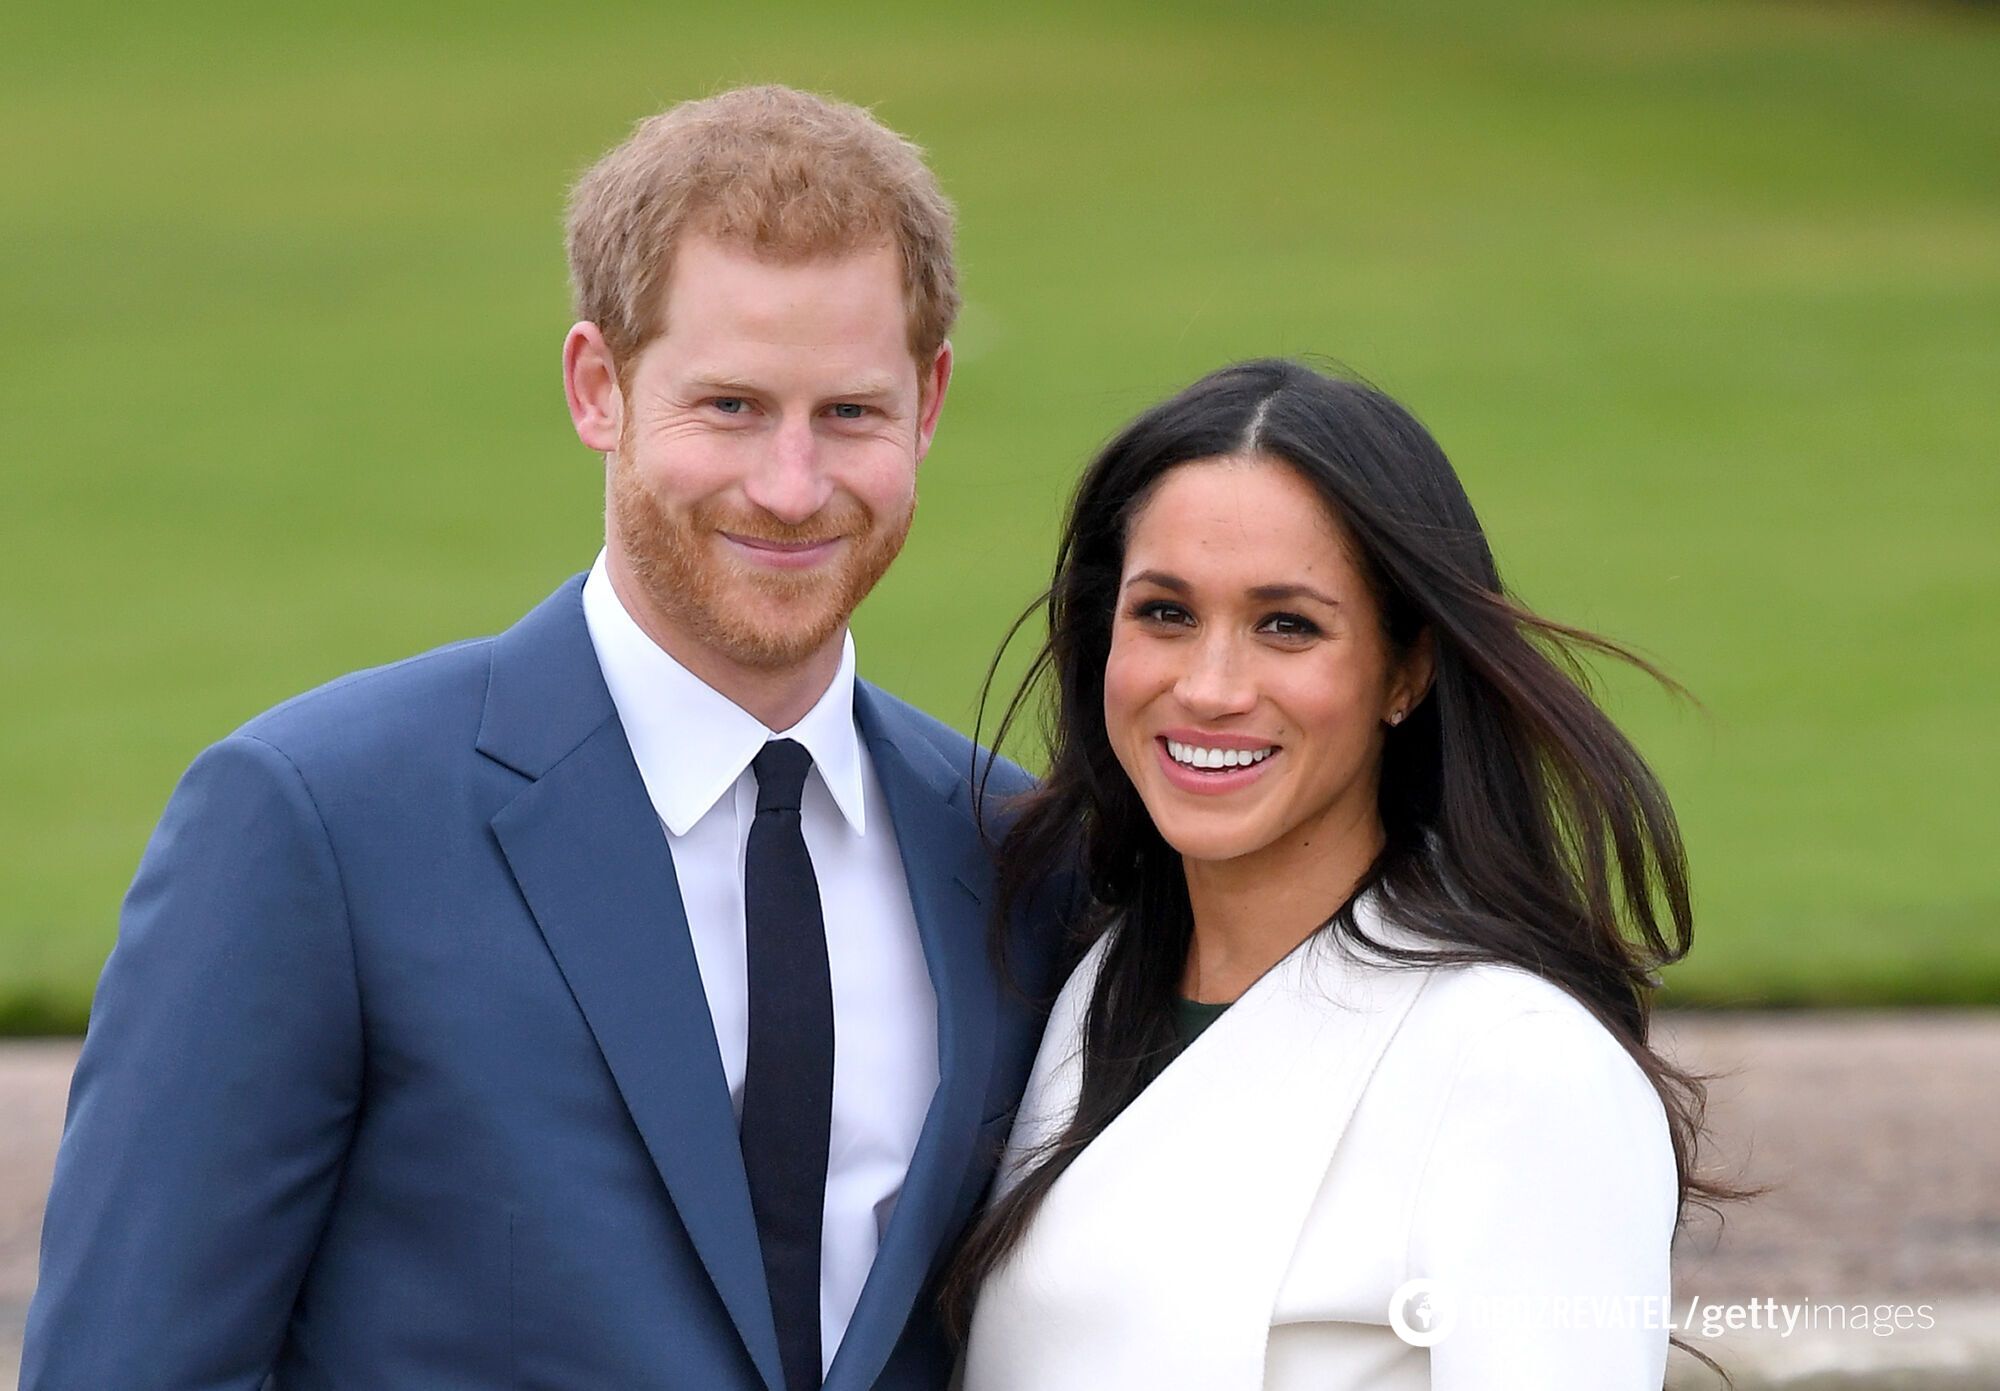 ''So sincere and simple'': the chef of a Canadian restaurant spoke about the behavior of Meghan Markle and Prince Harry, which impressed him